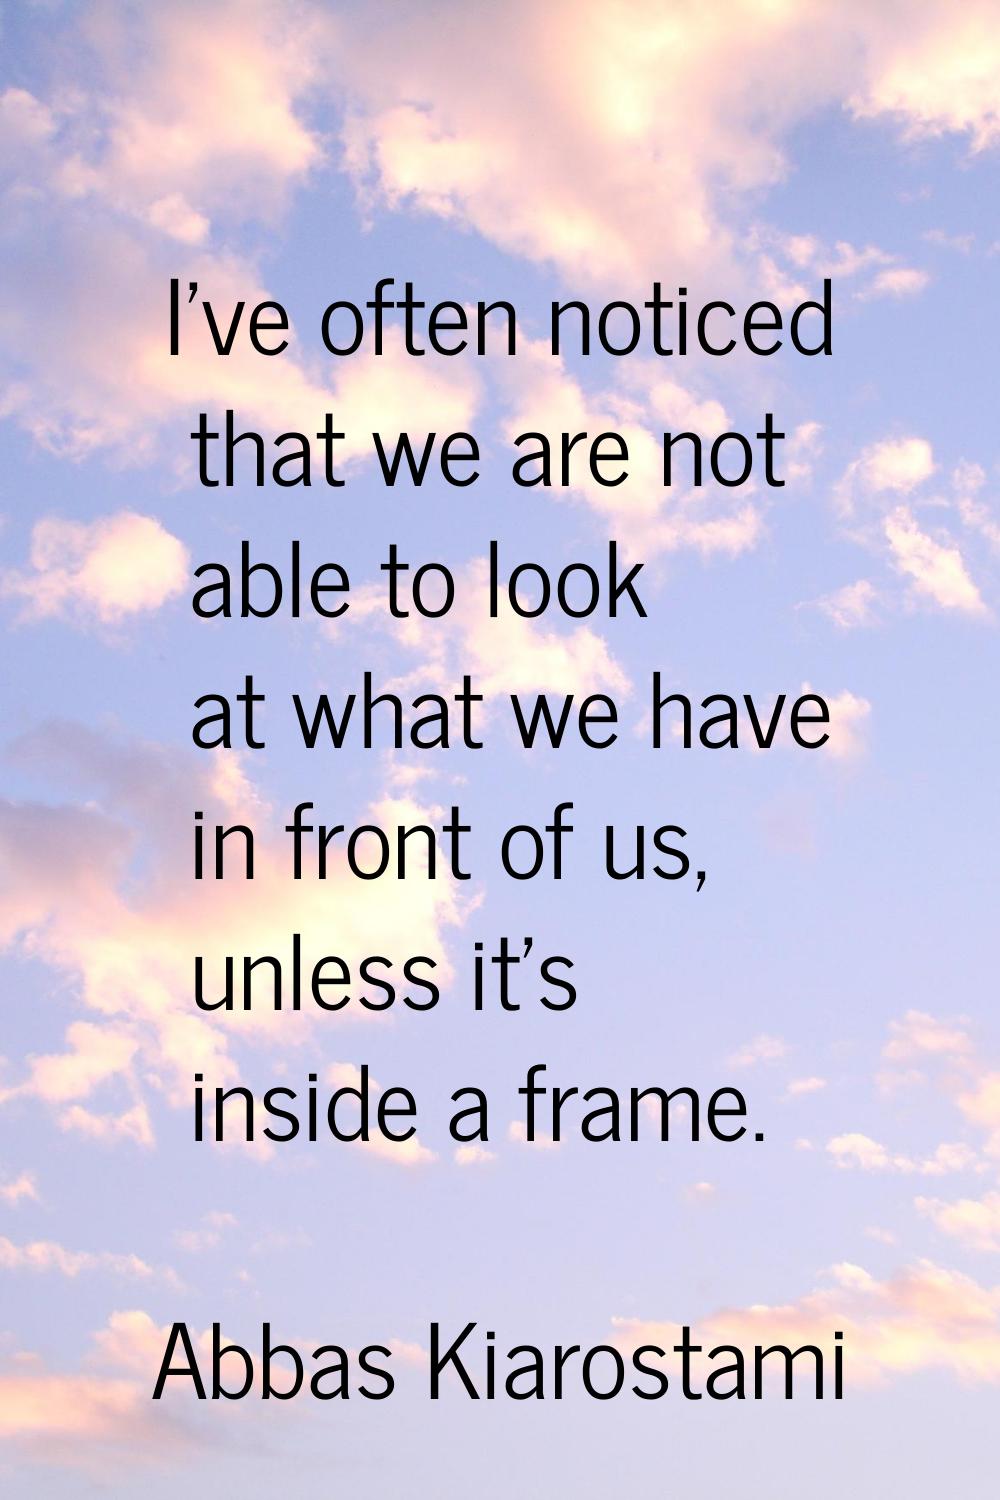 I've often noticed that we are not able to look at what we have in front of us, unless it's inside 